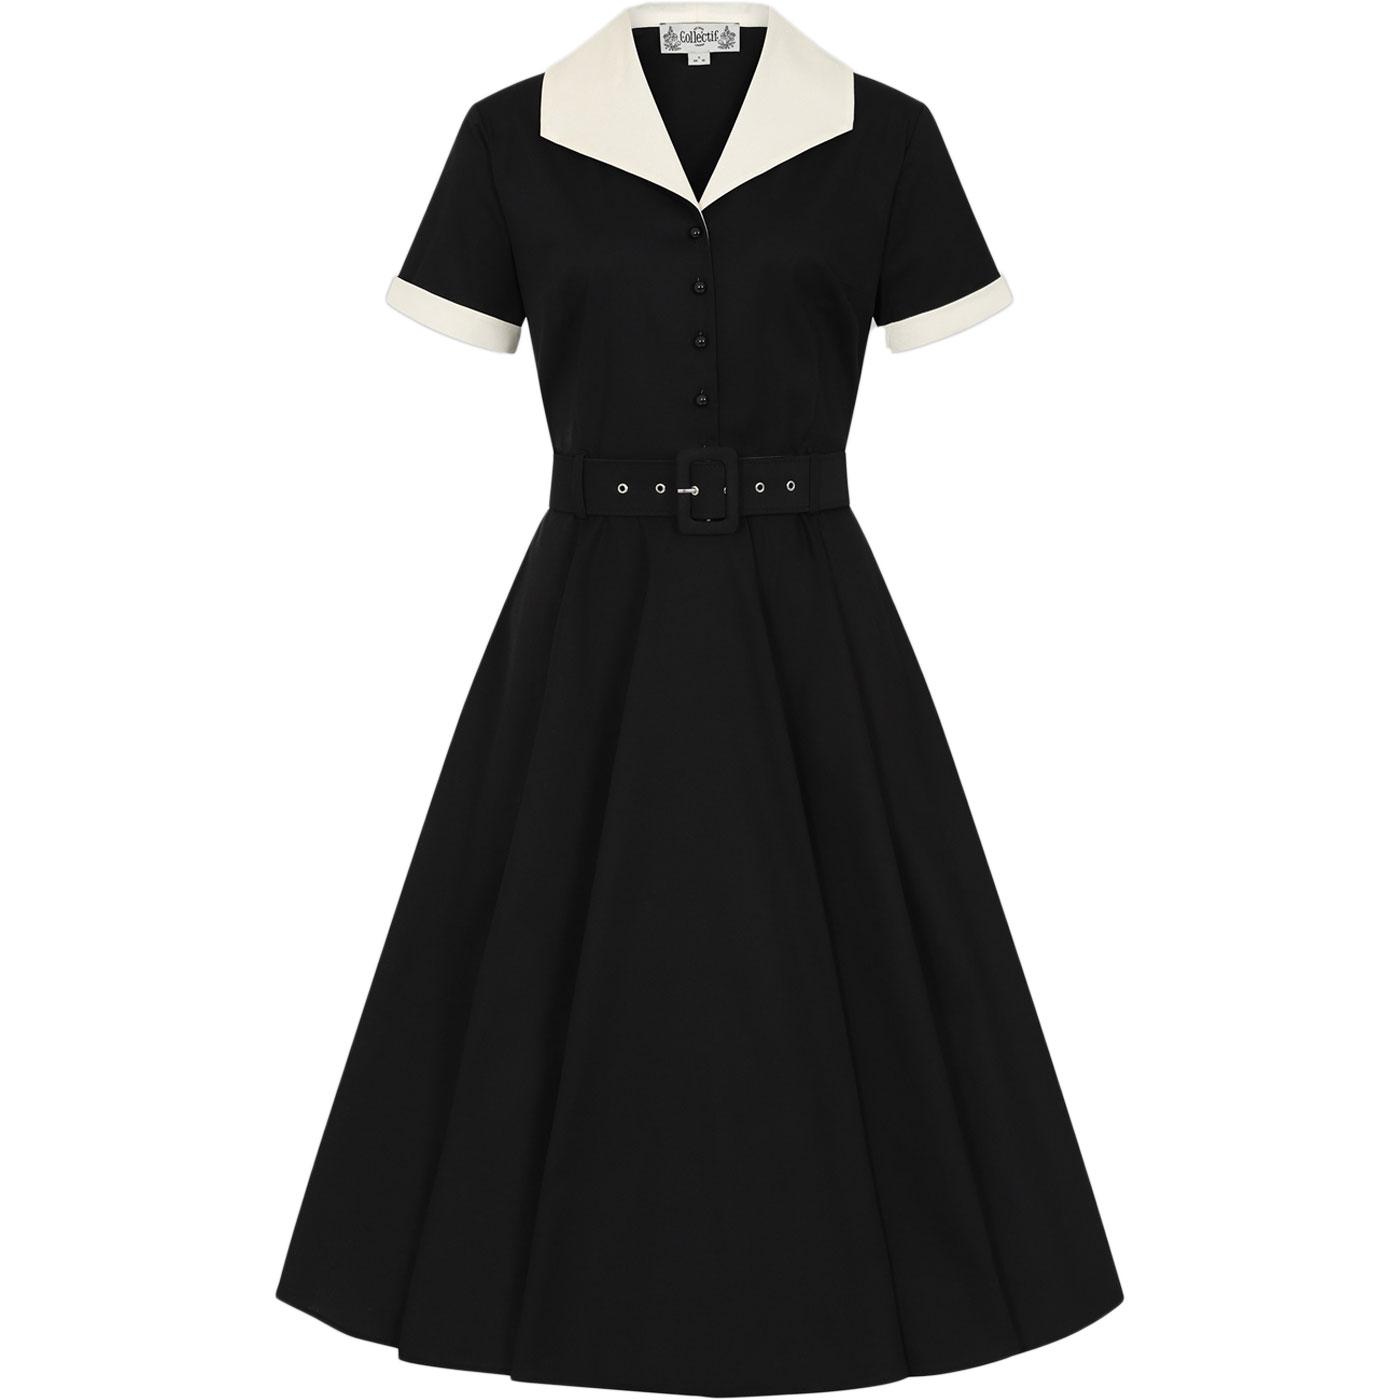 Collectif Taylor Retro 50s Diner Style Swing Dress in Black